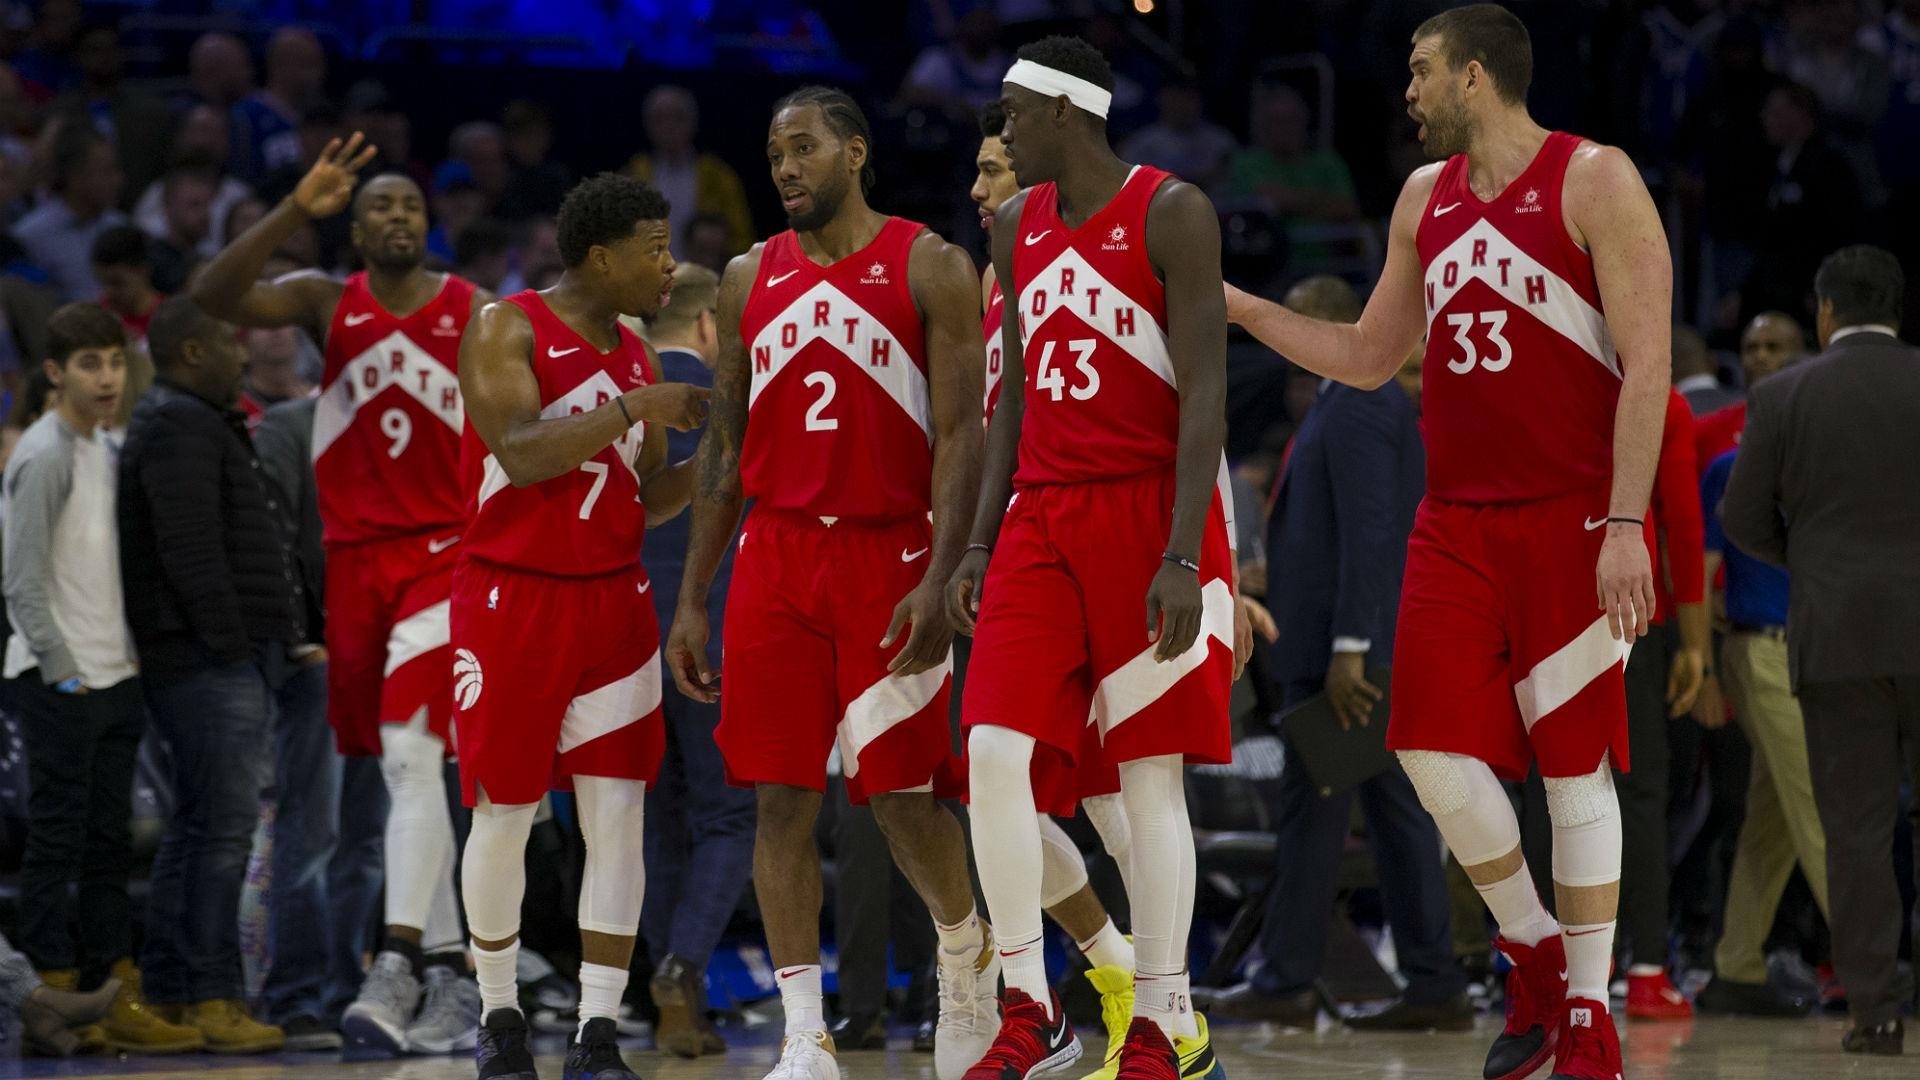 If Raptors win NBA Finals, will they visit White House?